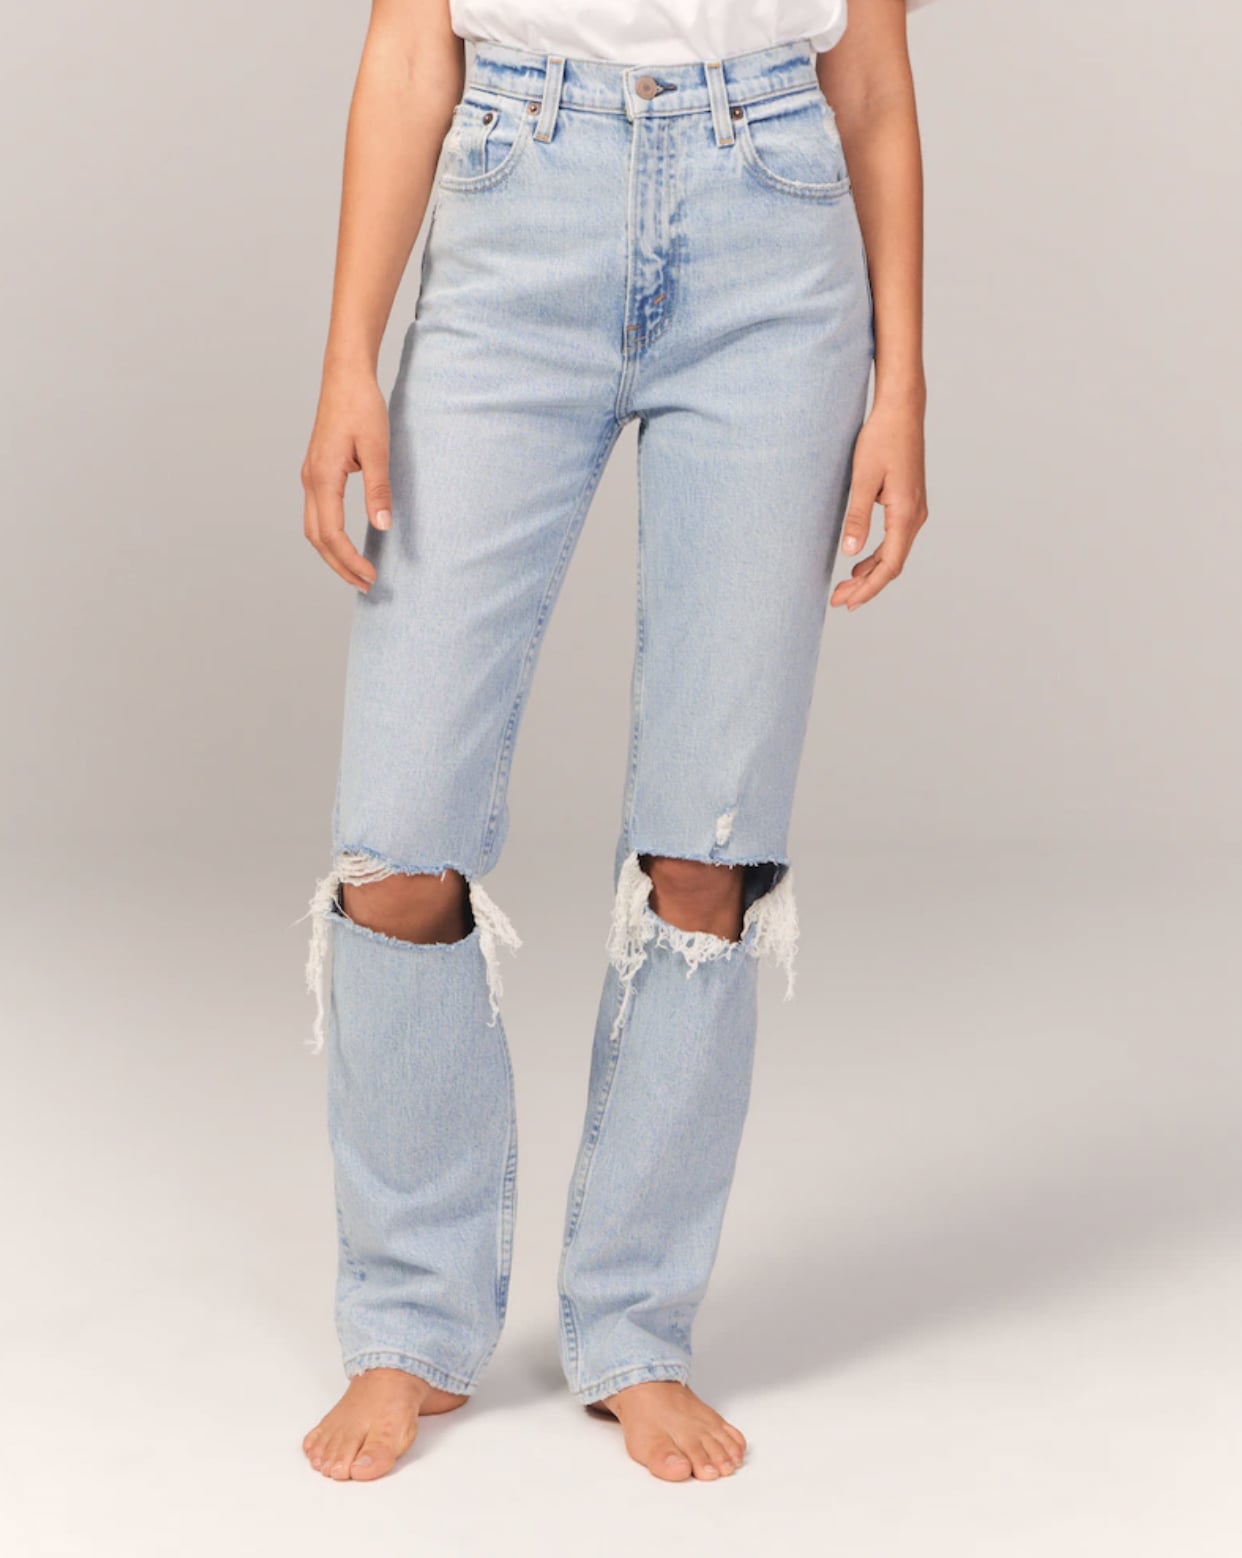 These Jeans Need A Place In Your Closet!